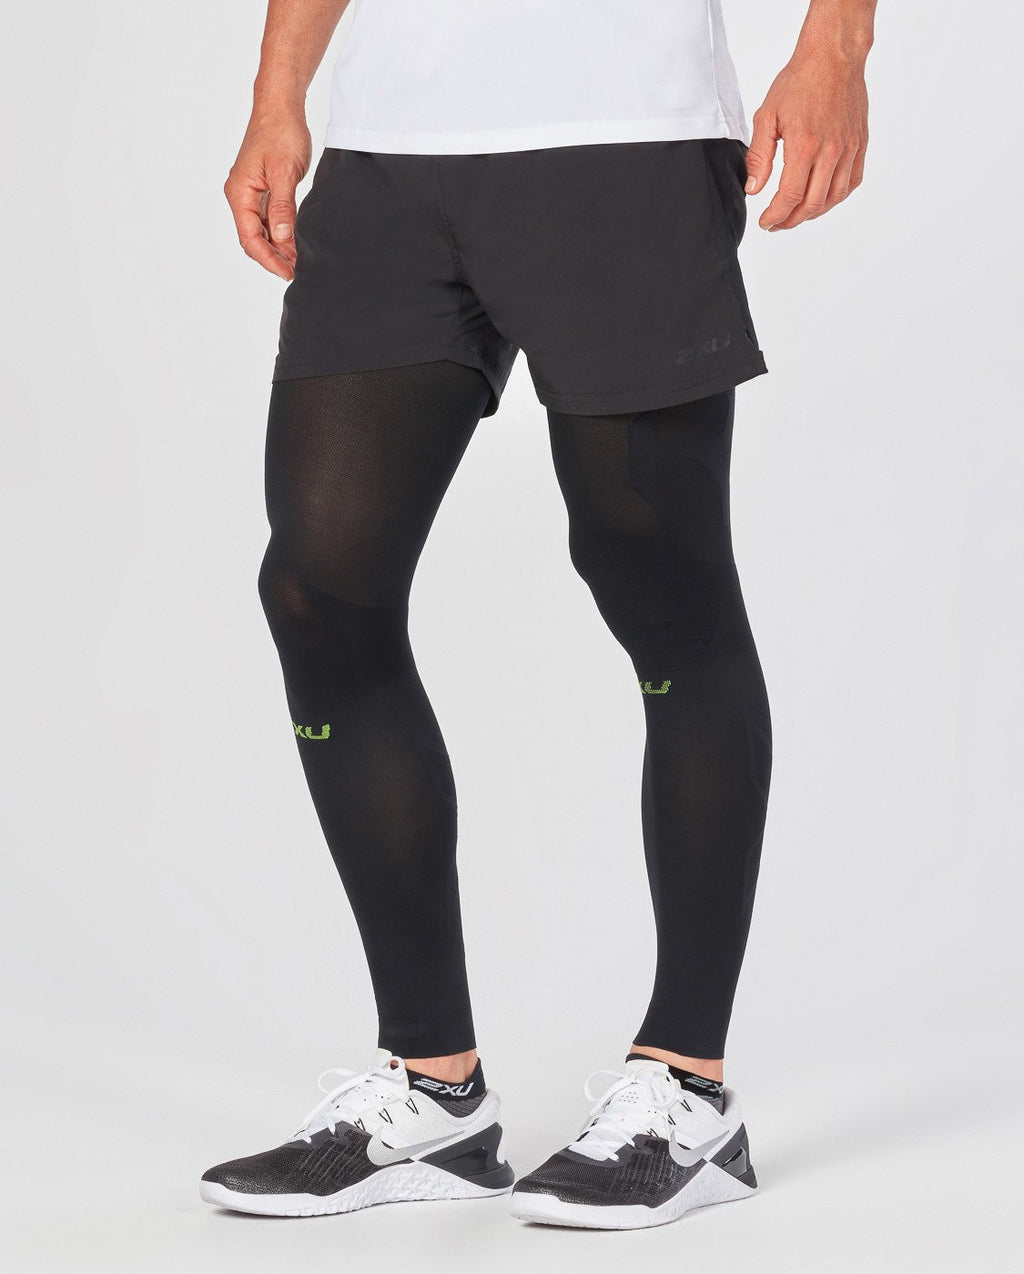 Nike Unisex Zoned Support Running Calf Sleeves Black/Silver Size XLarge 1  Pair